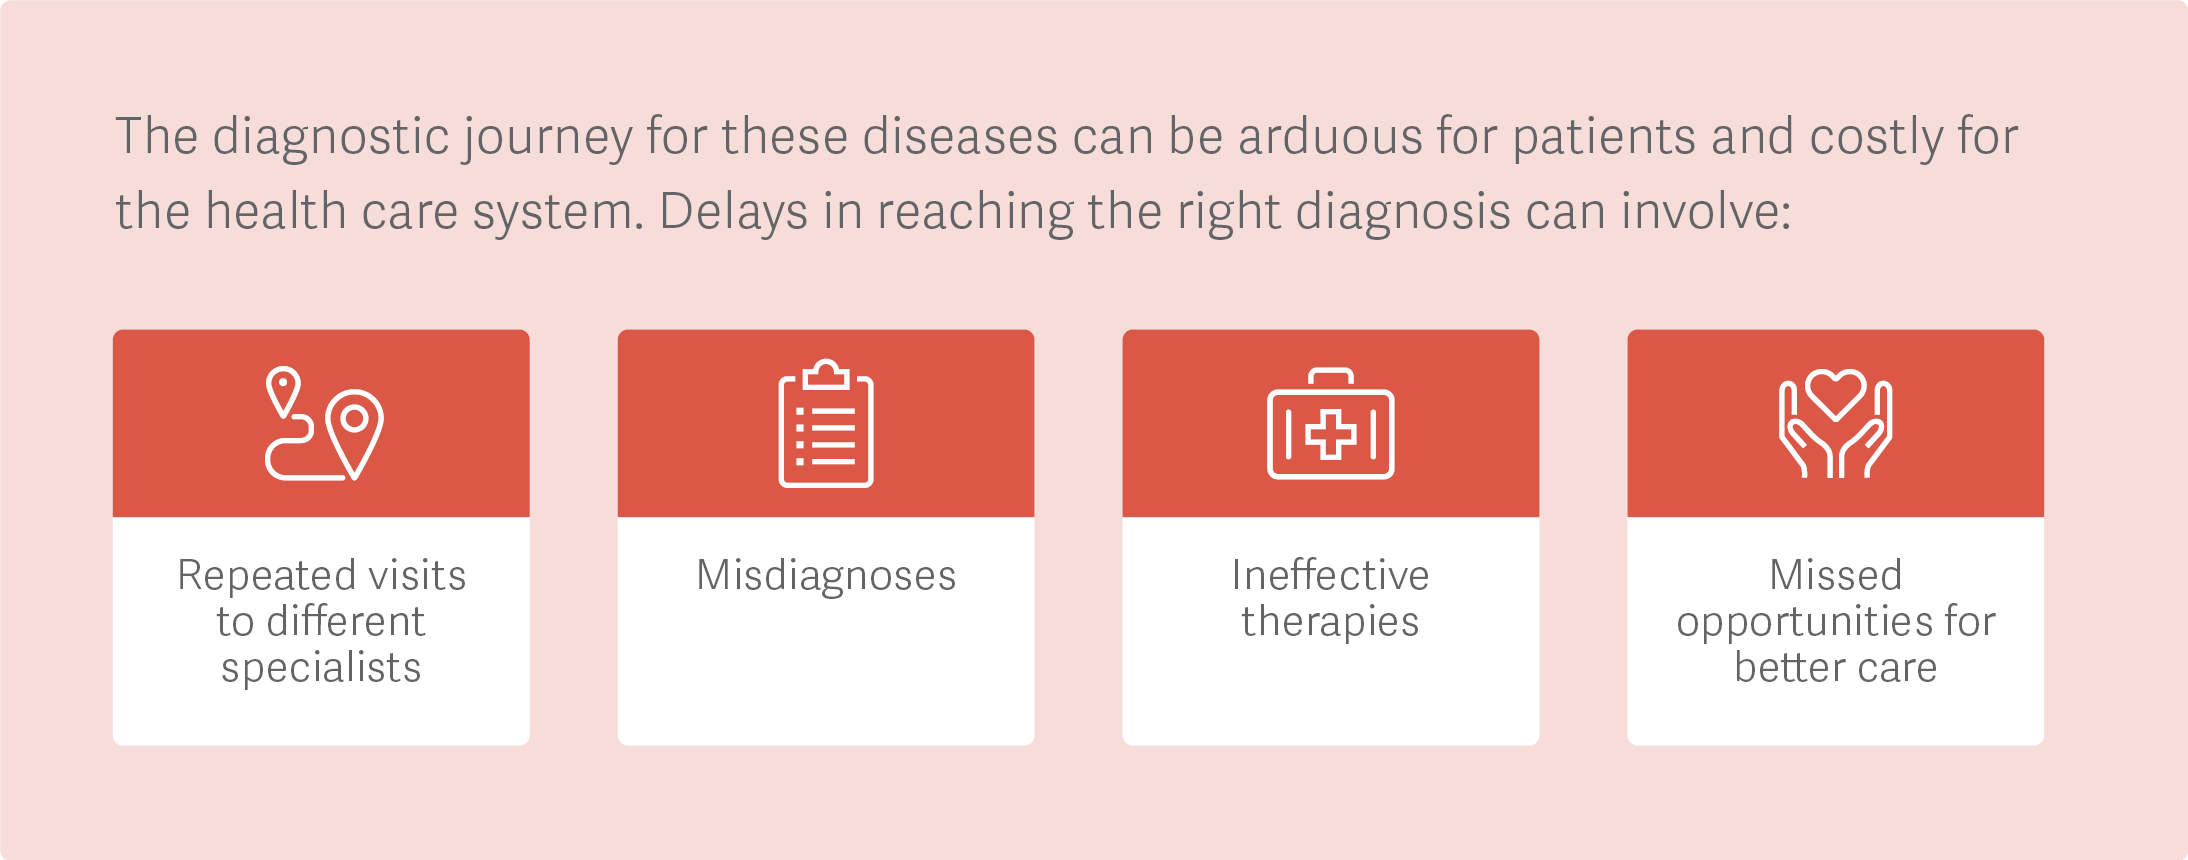 The diagnostic journey for these diseases can be arduous for patients and costly for the health care system. Delays in reaching the right diagnosis can involve repeated visits to different specialists, misdiagnoses, ineffective therapies, and missed opportunities for better care.